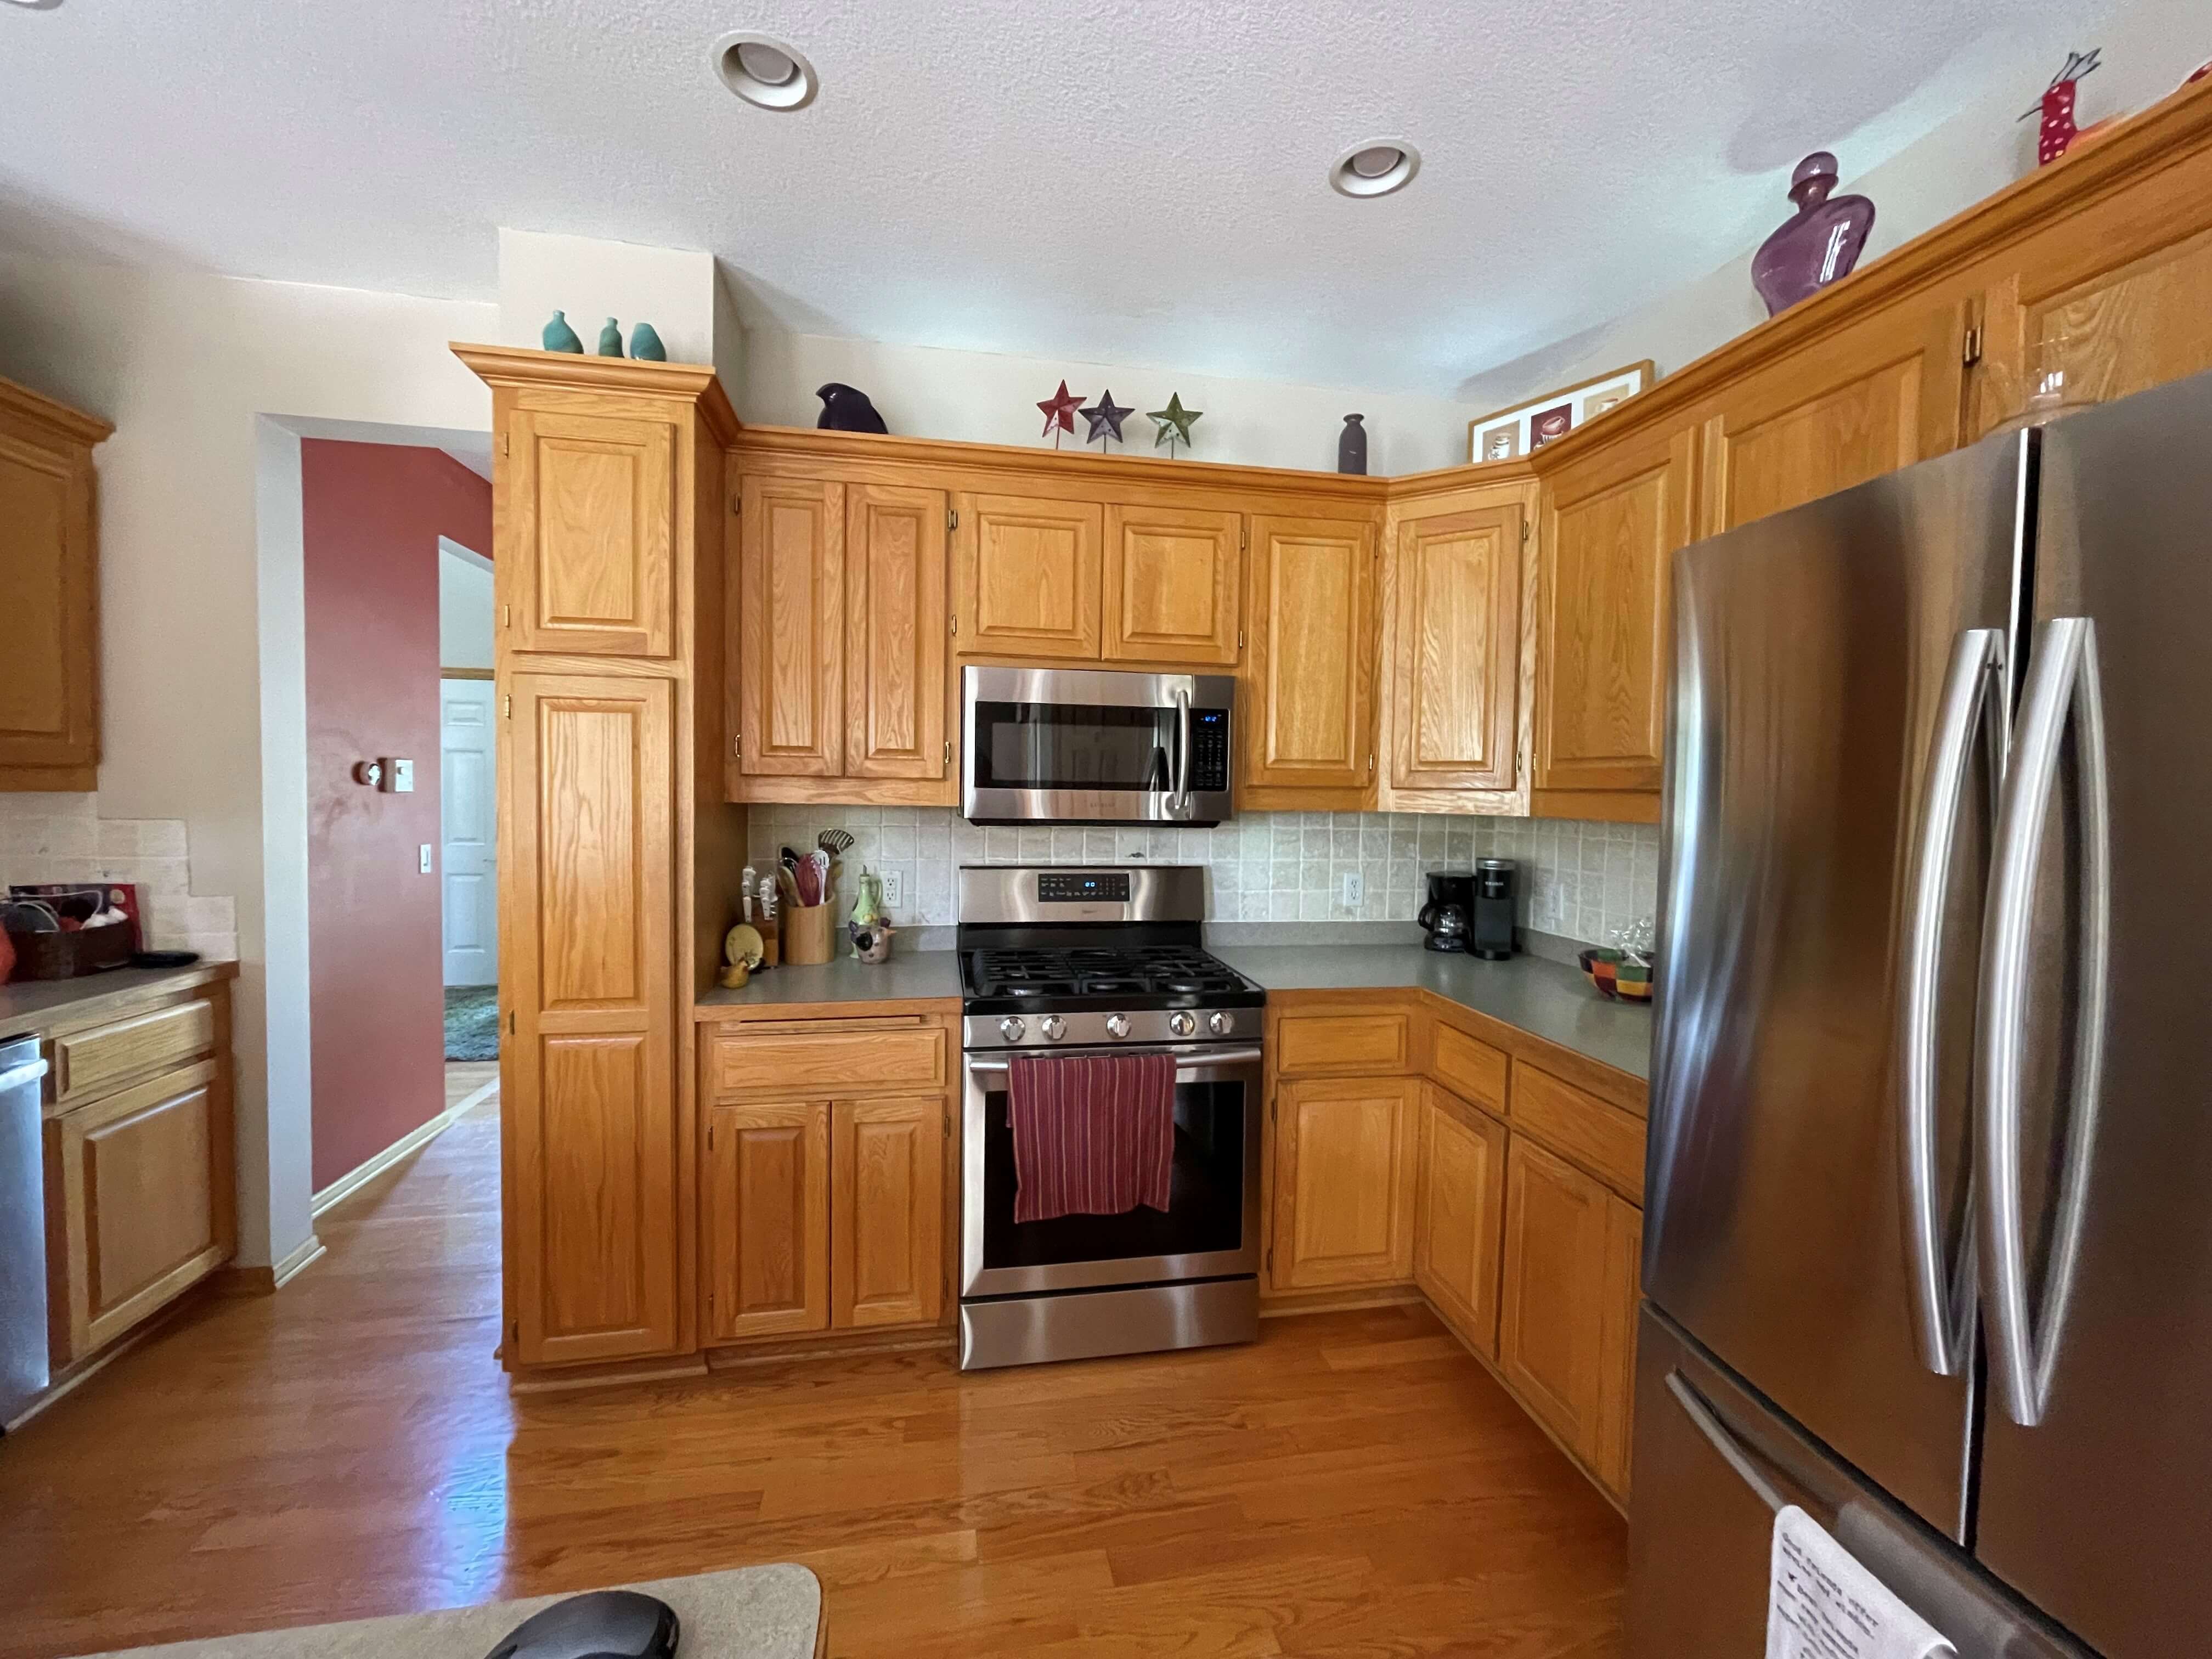 Remodel Stories A Kitchen Update to Last Another 20 years   Dura ...